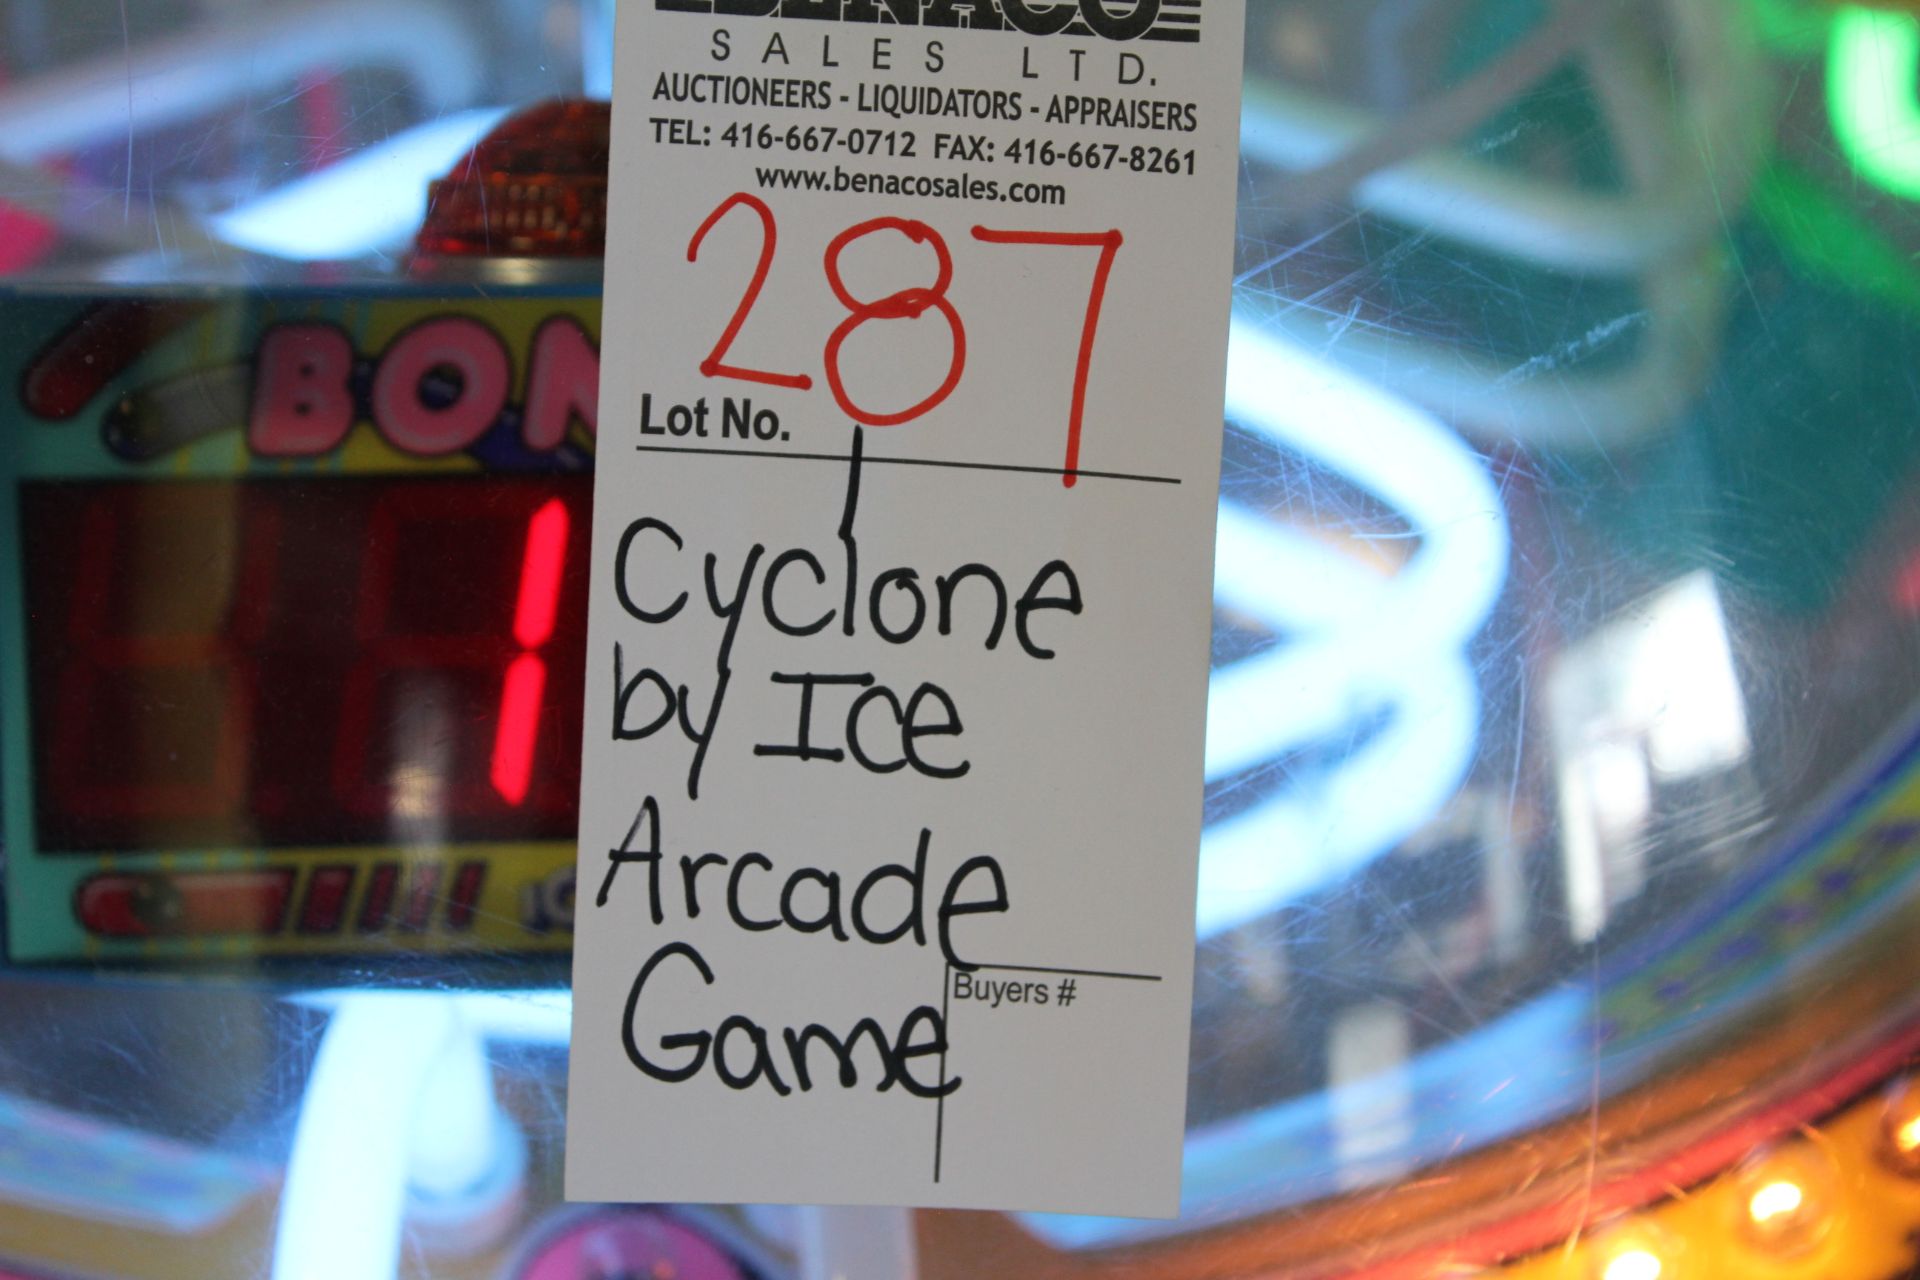 1X, CYCLONE (BY ICE) ARCADE GAME - Image 4 of 4